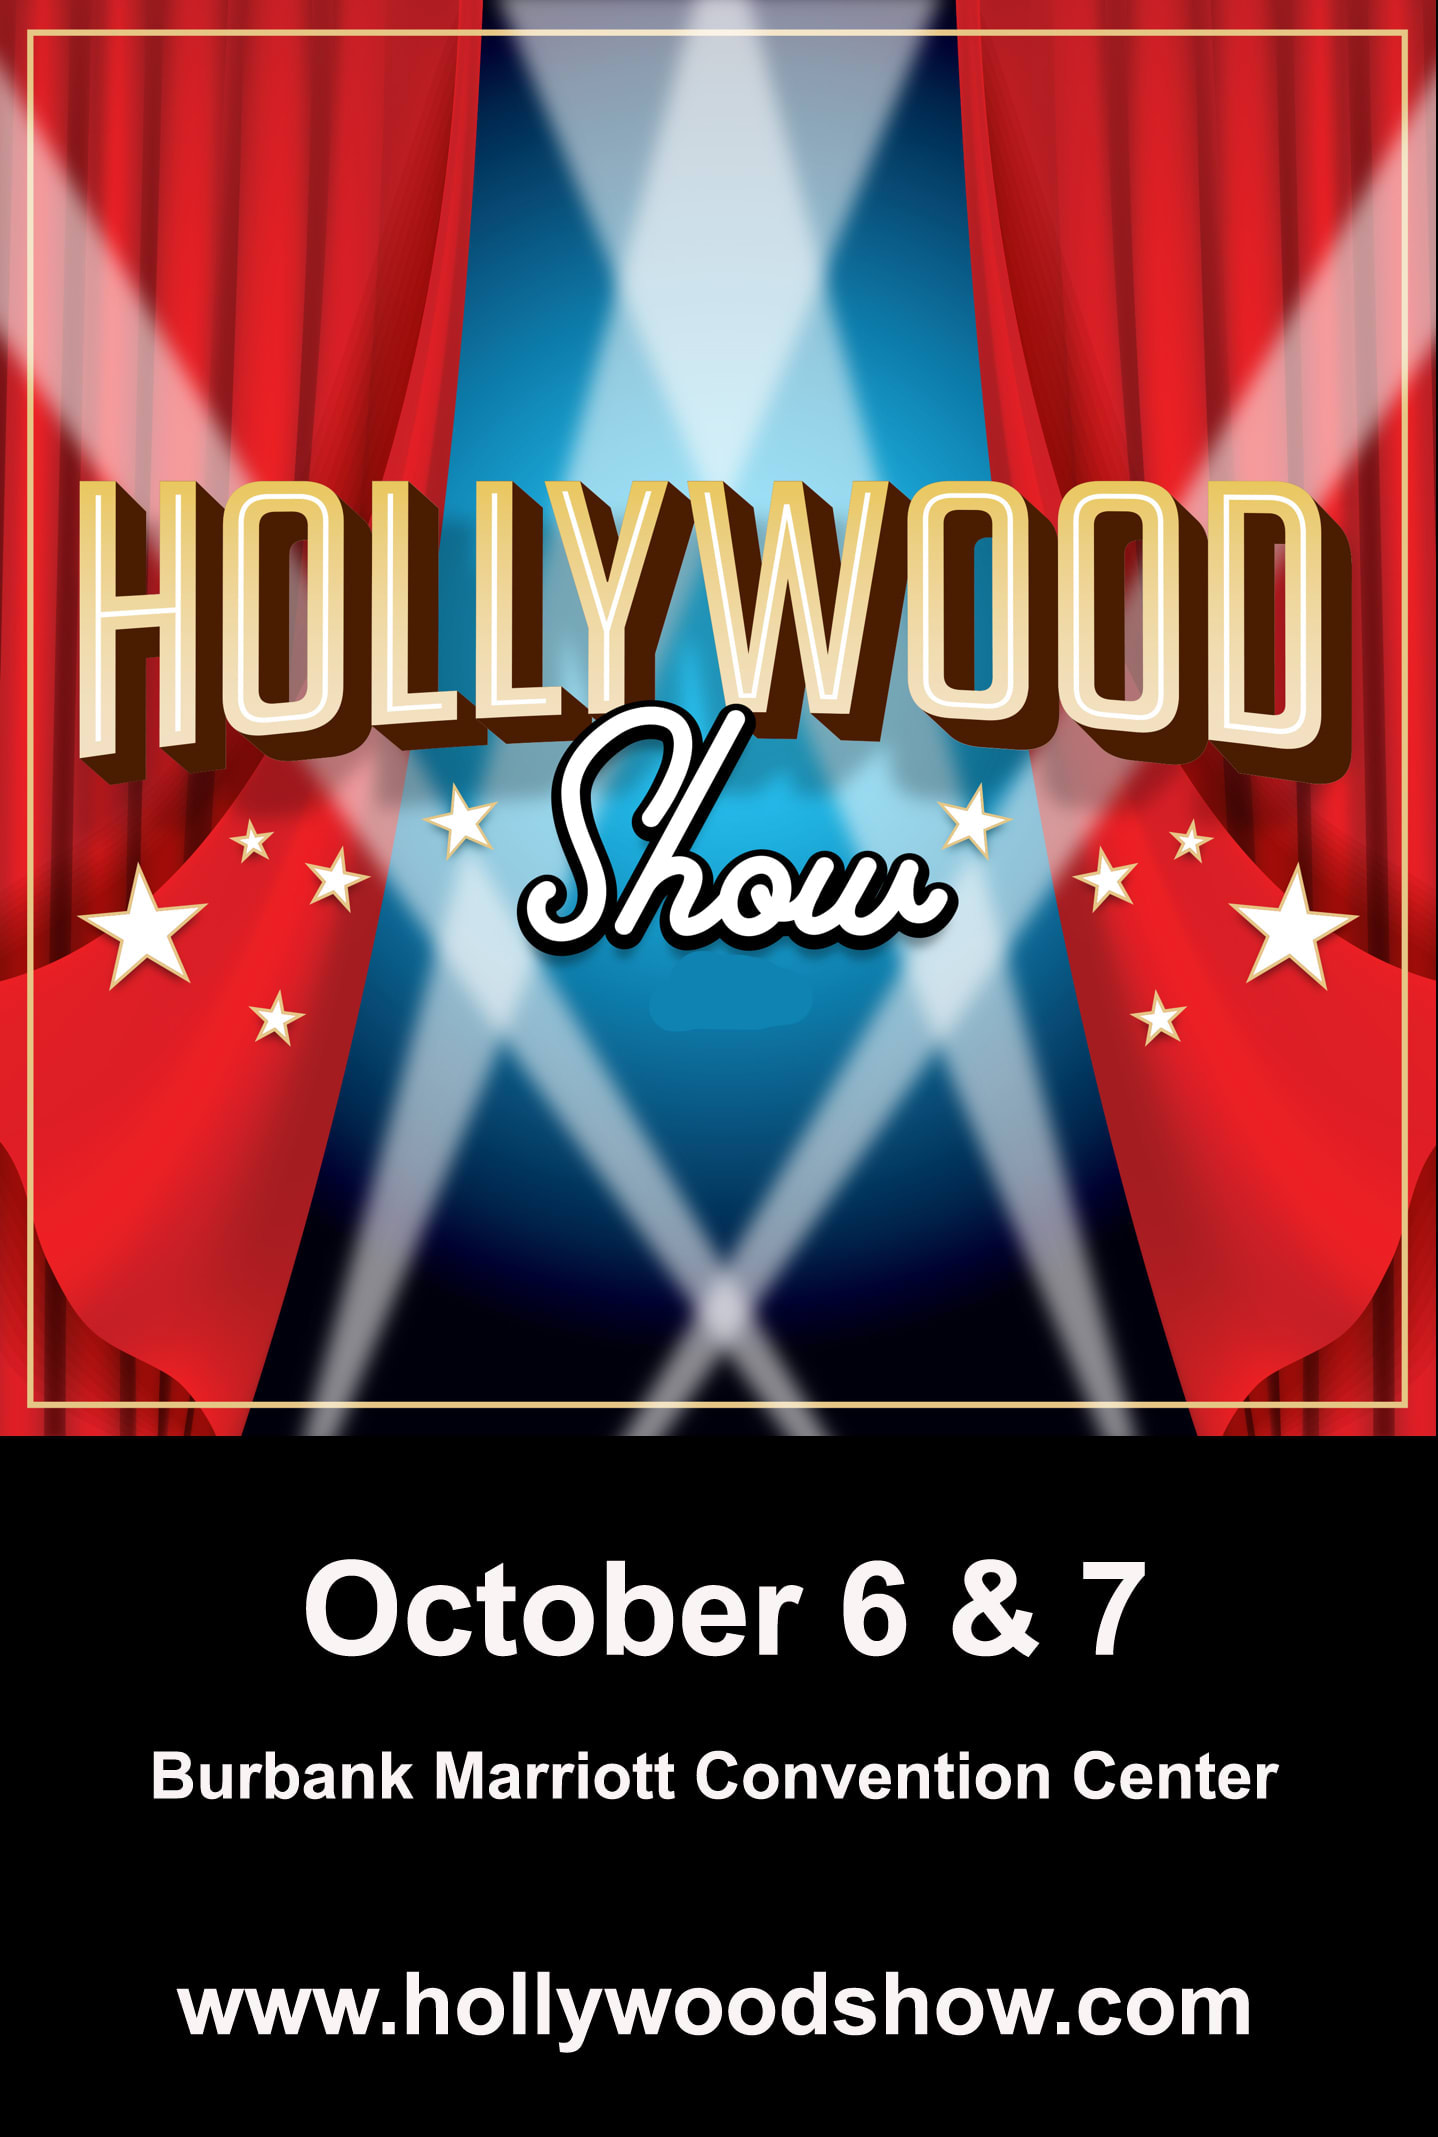 The Hollywoodshow show poster